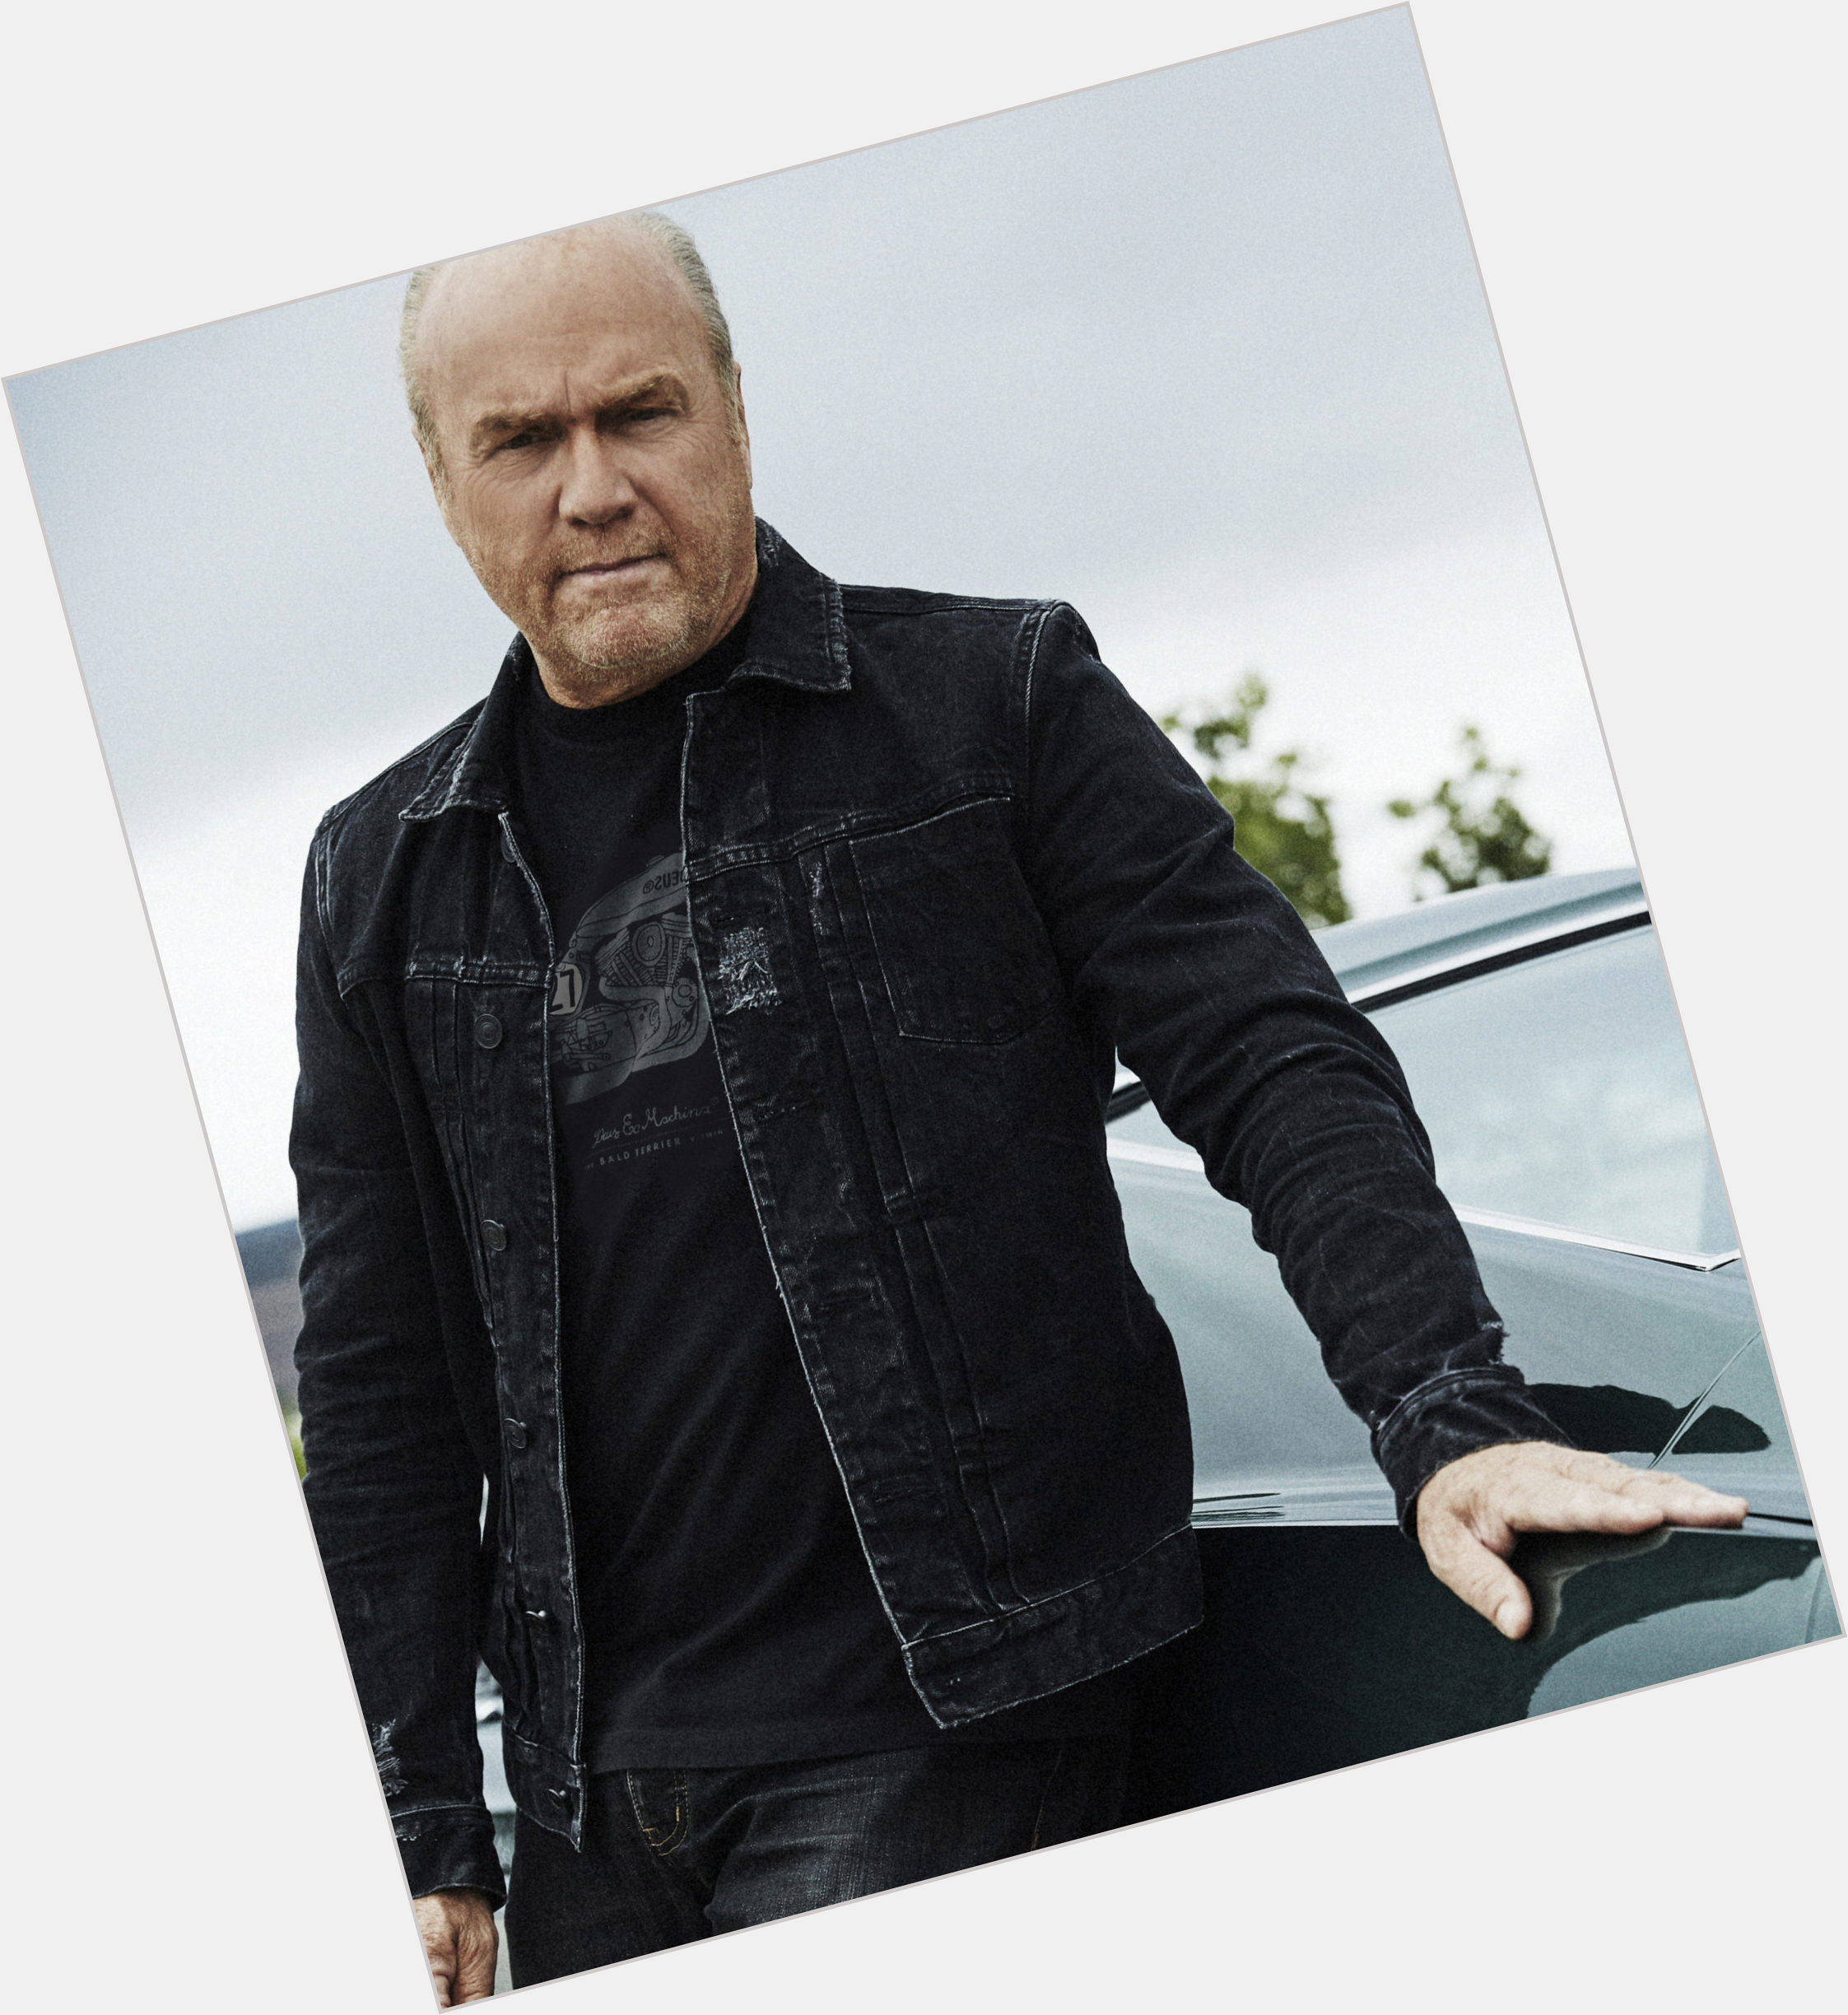 Https://fanpagepress.net/m/G/Greg Laurie Hairstyle 3